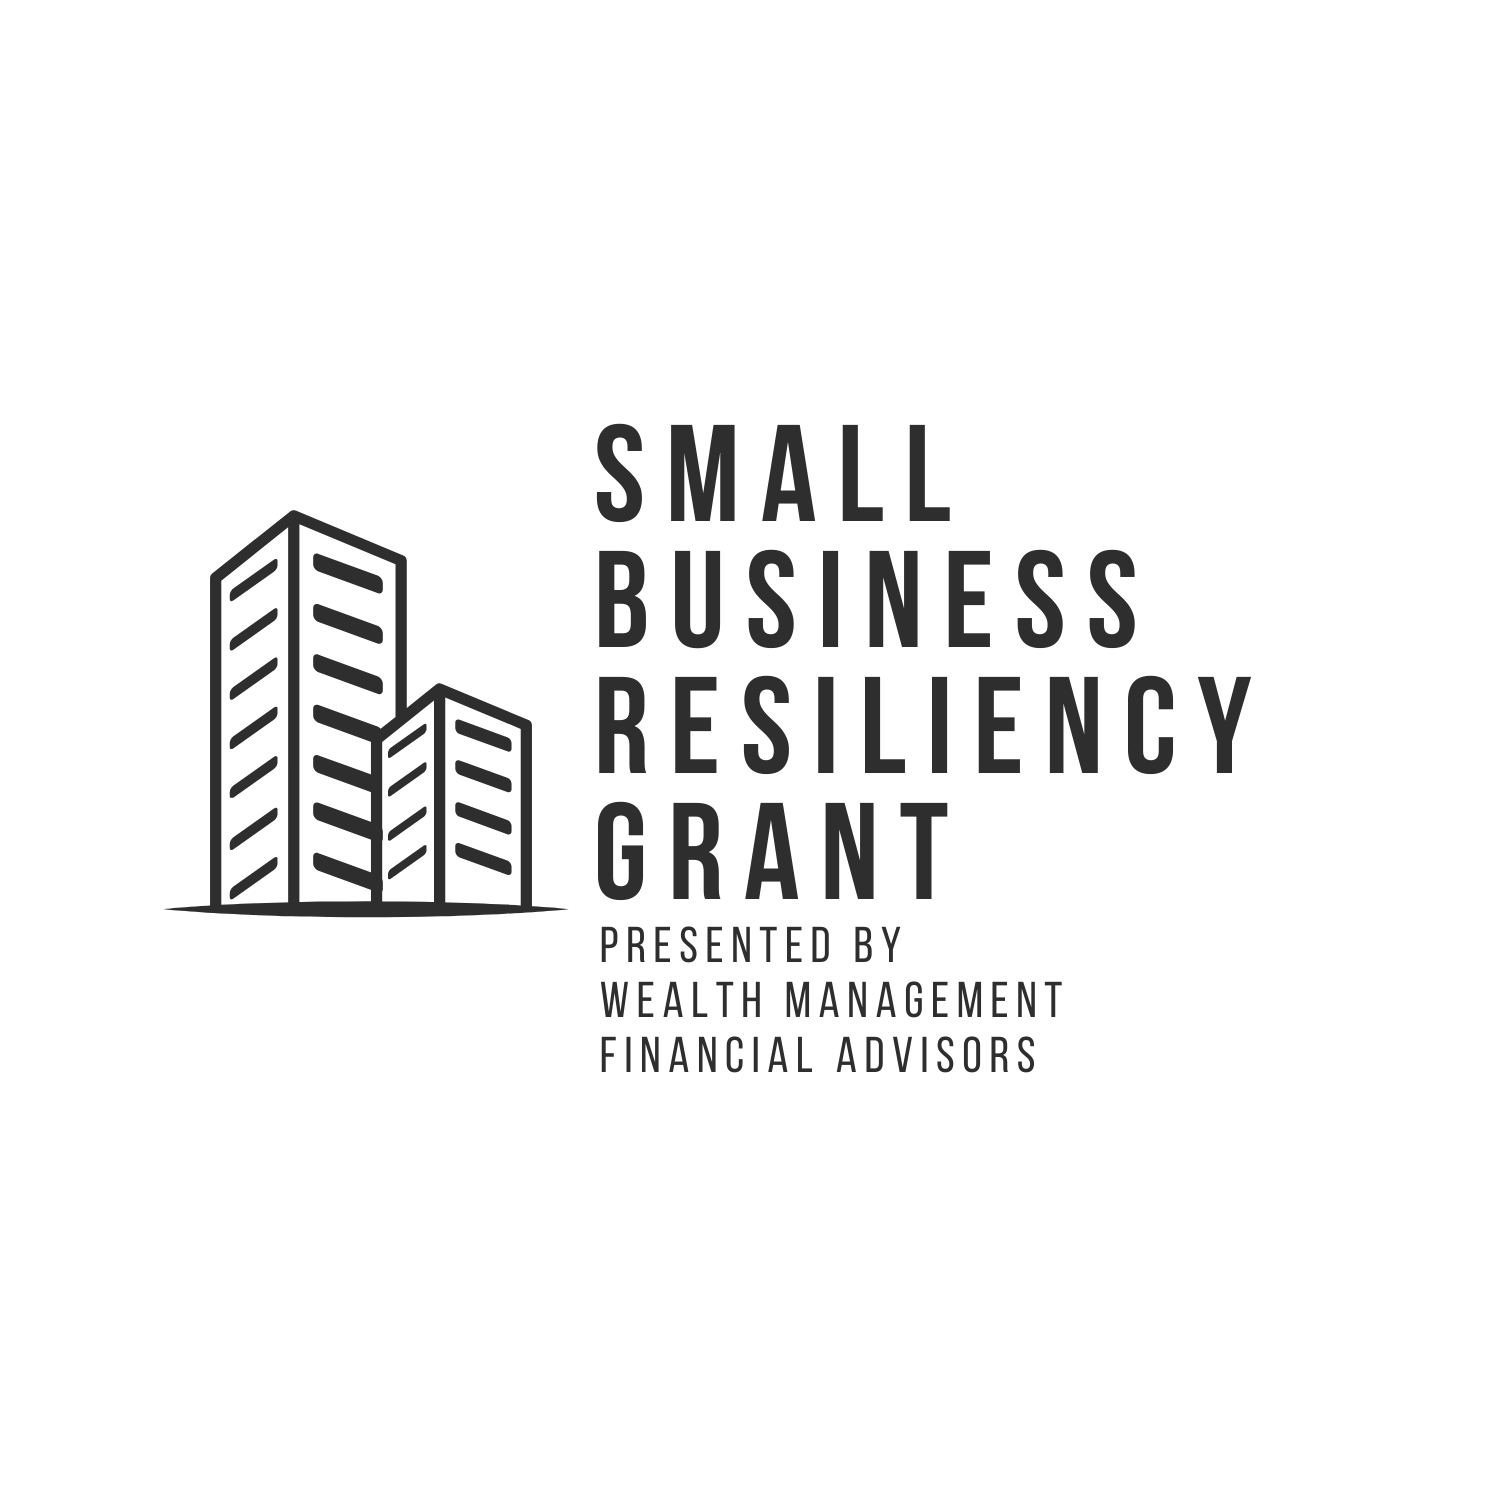 Small Business Resiliency Grant